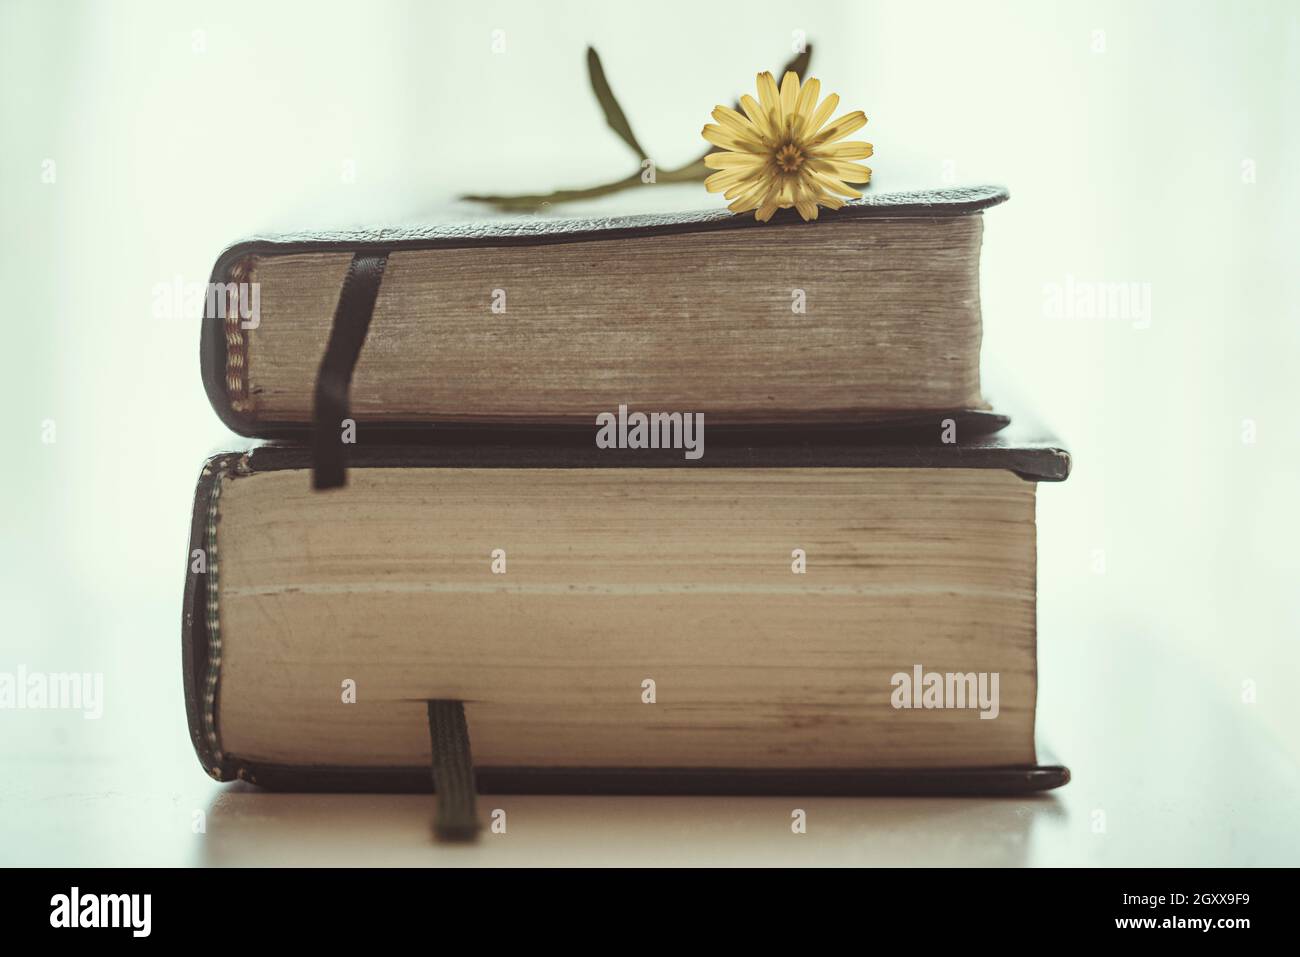 Flower on top of two hardback books on a table Stock Photo